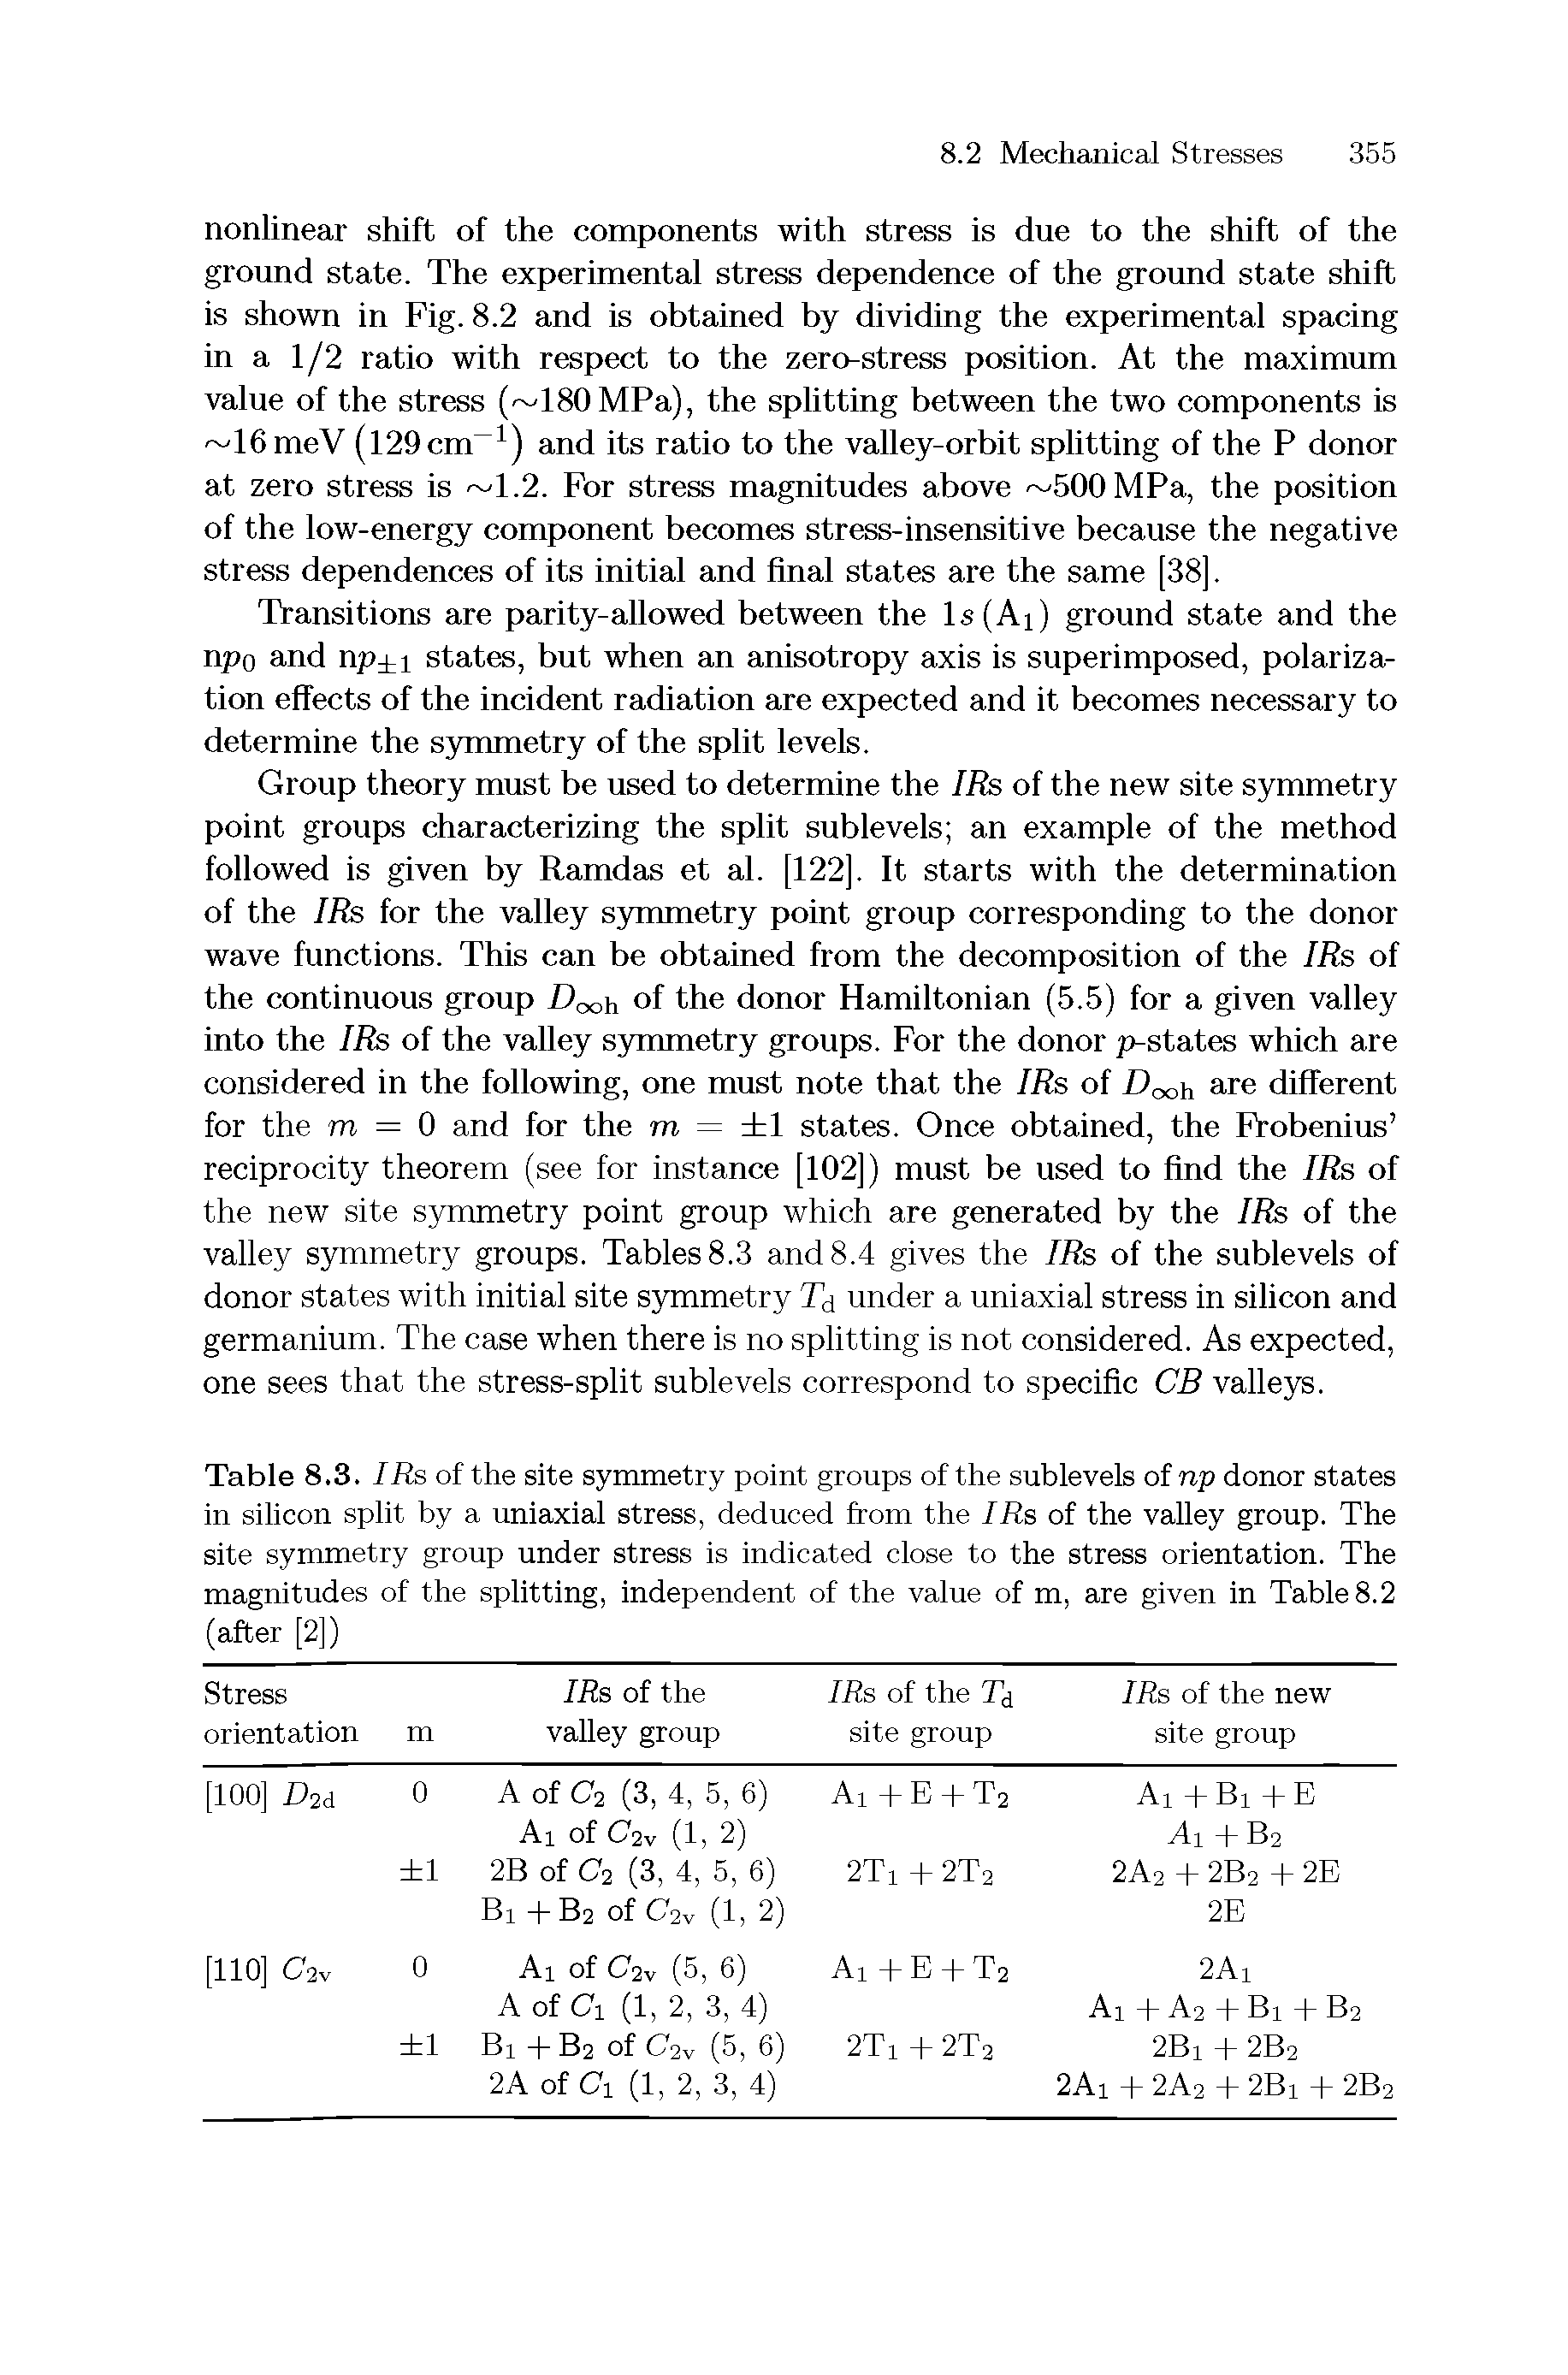 Table 8.3. IRs of the site symmetry point groups of the sublevels of np donor states in silicon split by a uniaxial stress, deduced from the IRs of the valley group. The site symmetry group under stress is indicated close to the stress orientation. The magnitudes of the splitting, independent of the value of m, are given in Table 8.2 (after [2])...